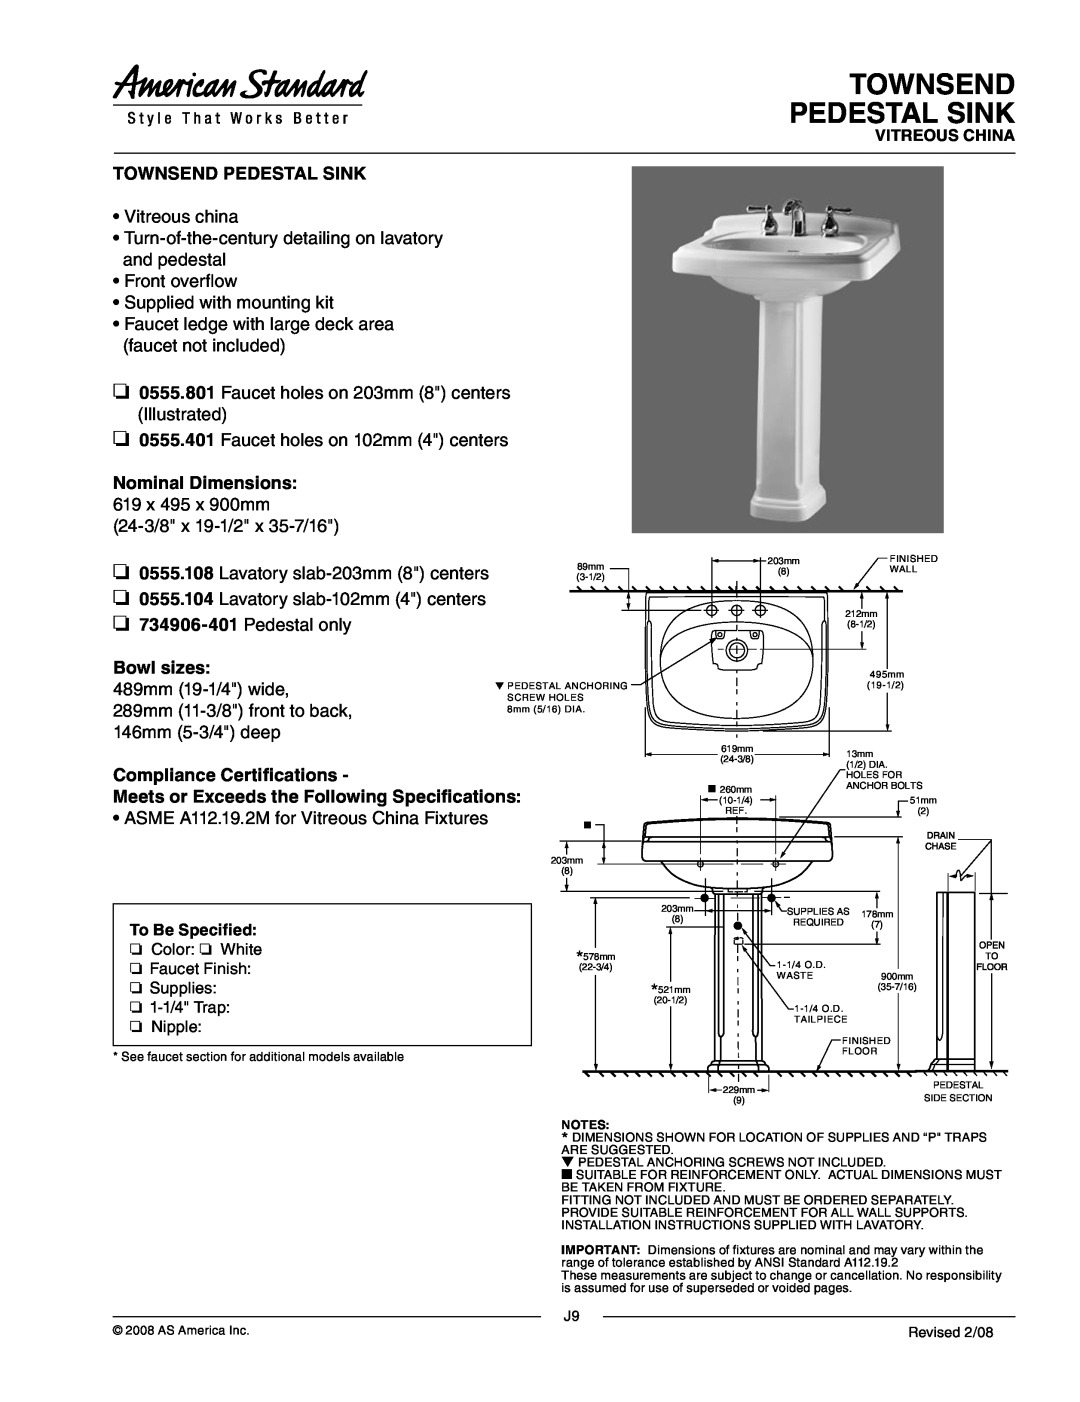 American Standard 0555.108 dimensions Townsend Pedestal Sink, Nominal Dimensions, Bowl sizes, Compliance Certifications 